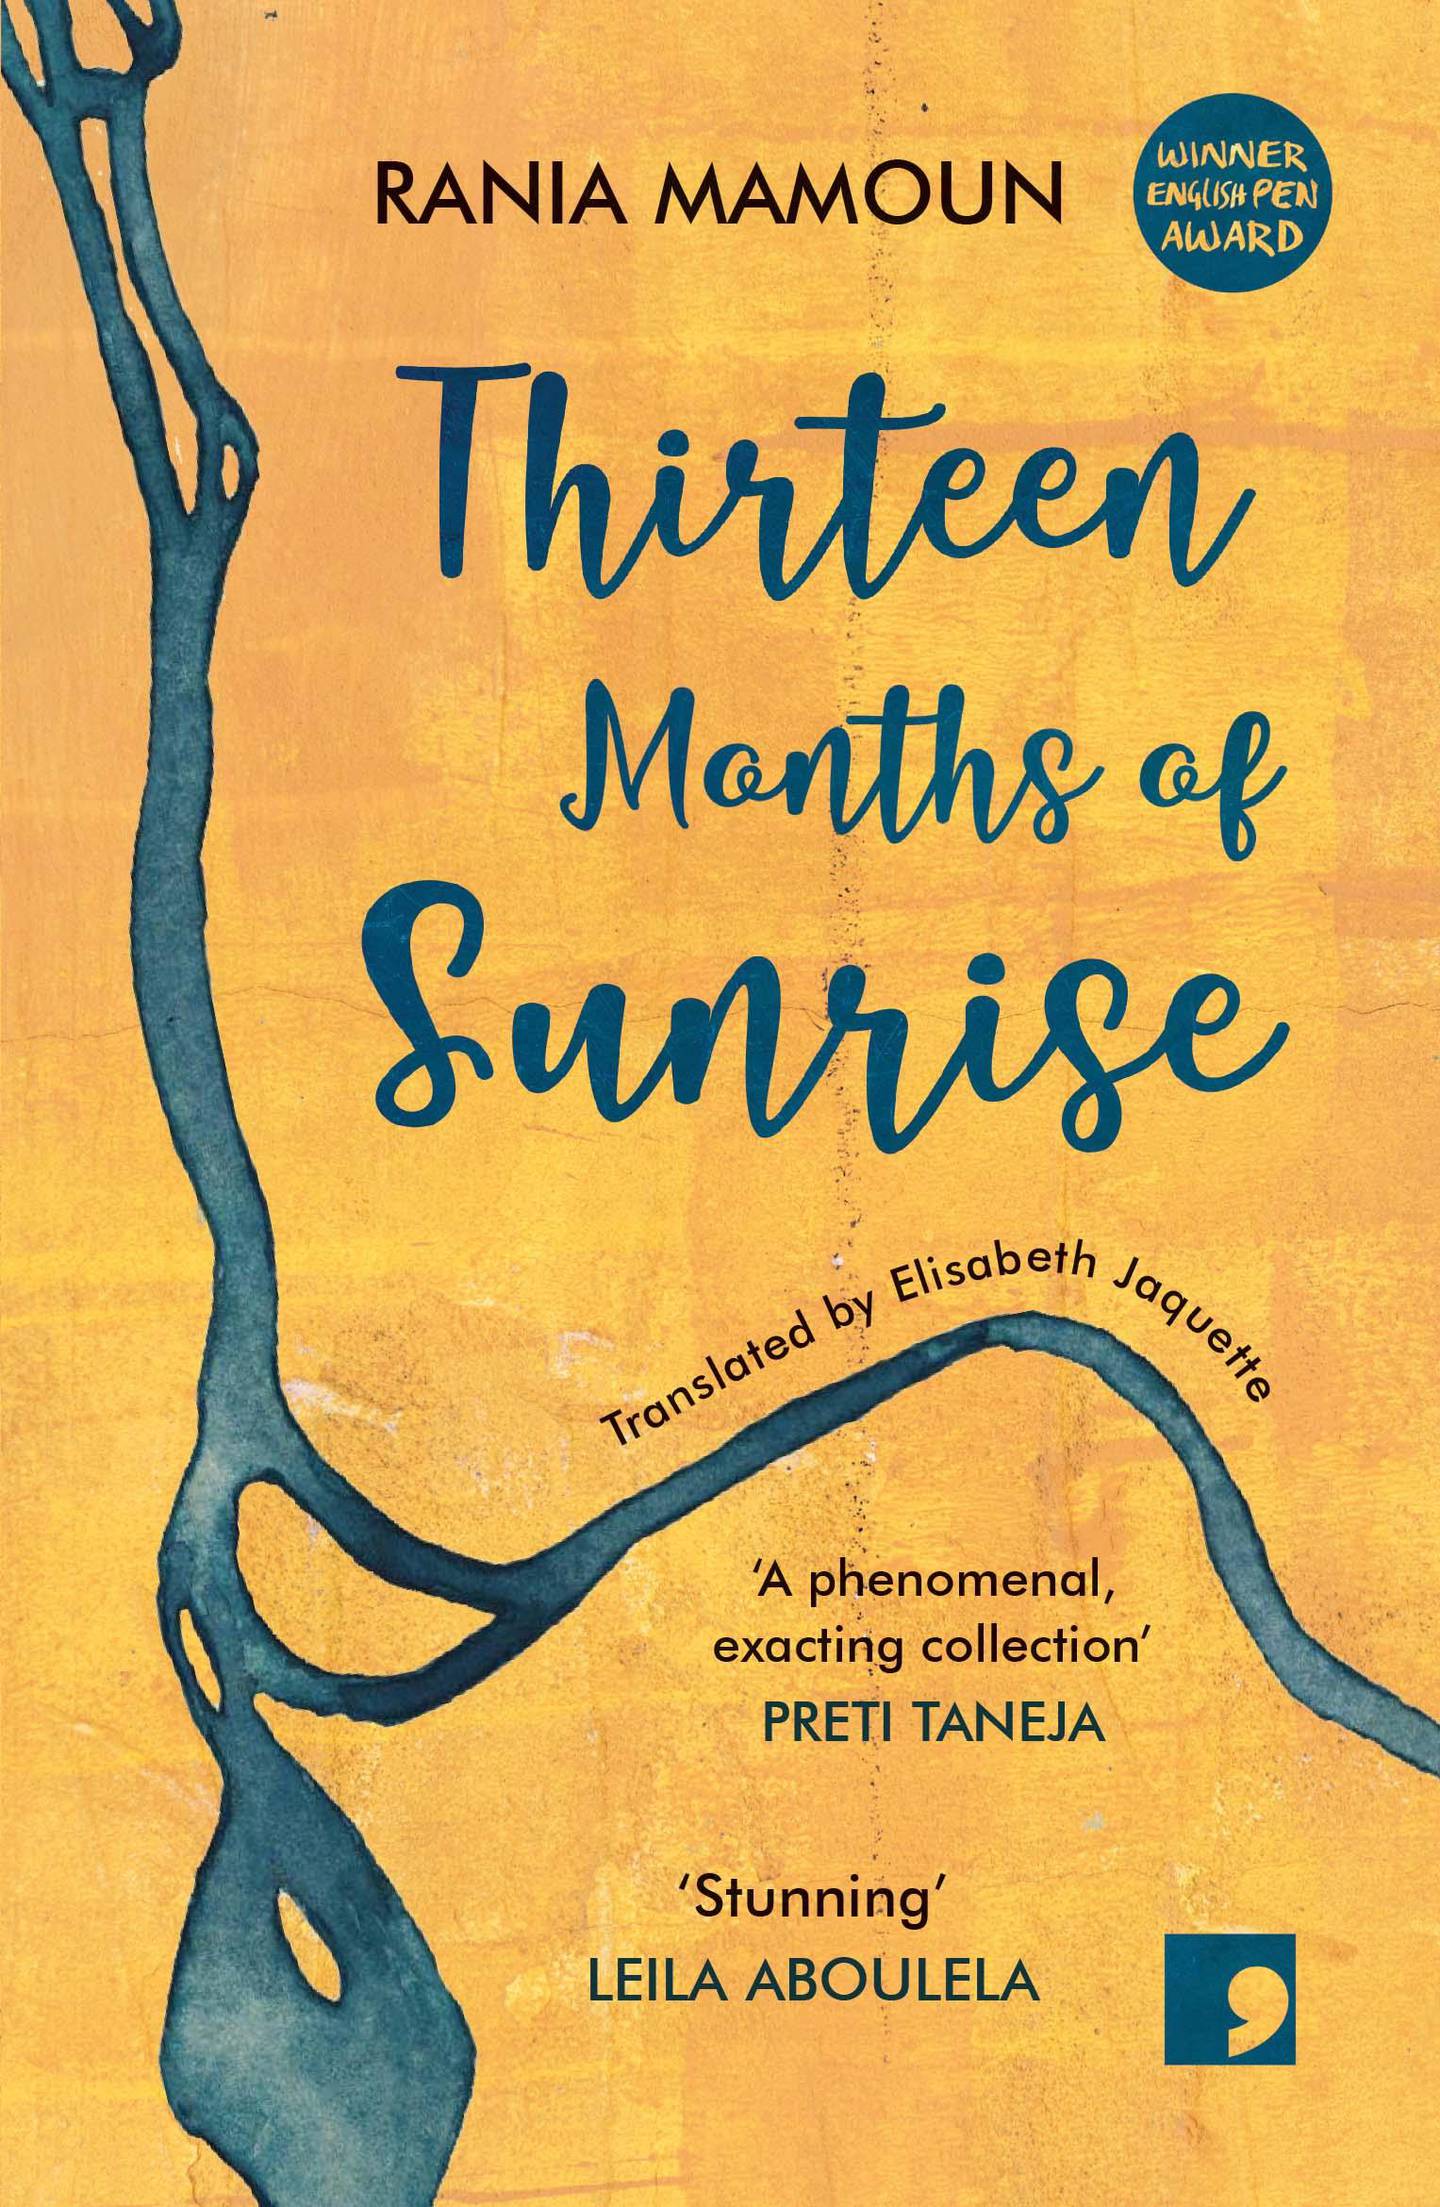 Thirteen Months of Sunrise by Rania Mamoun, translated by Elisabeth Jaquette. Courtesy Comma Press